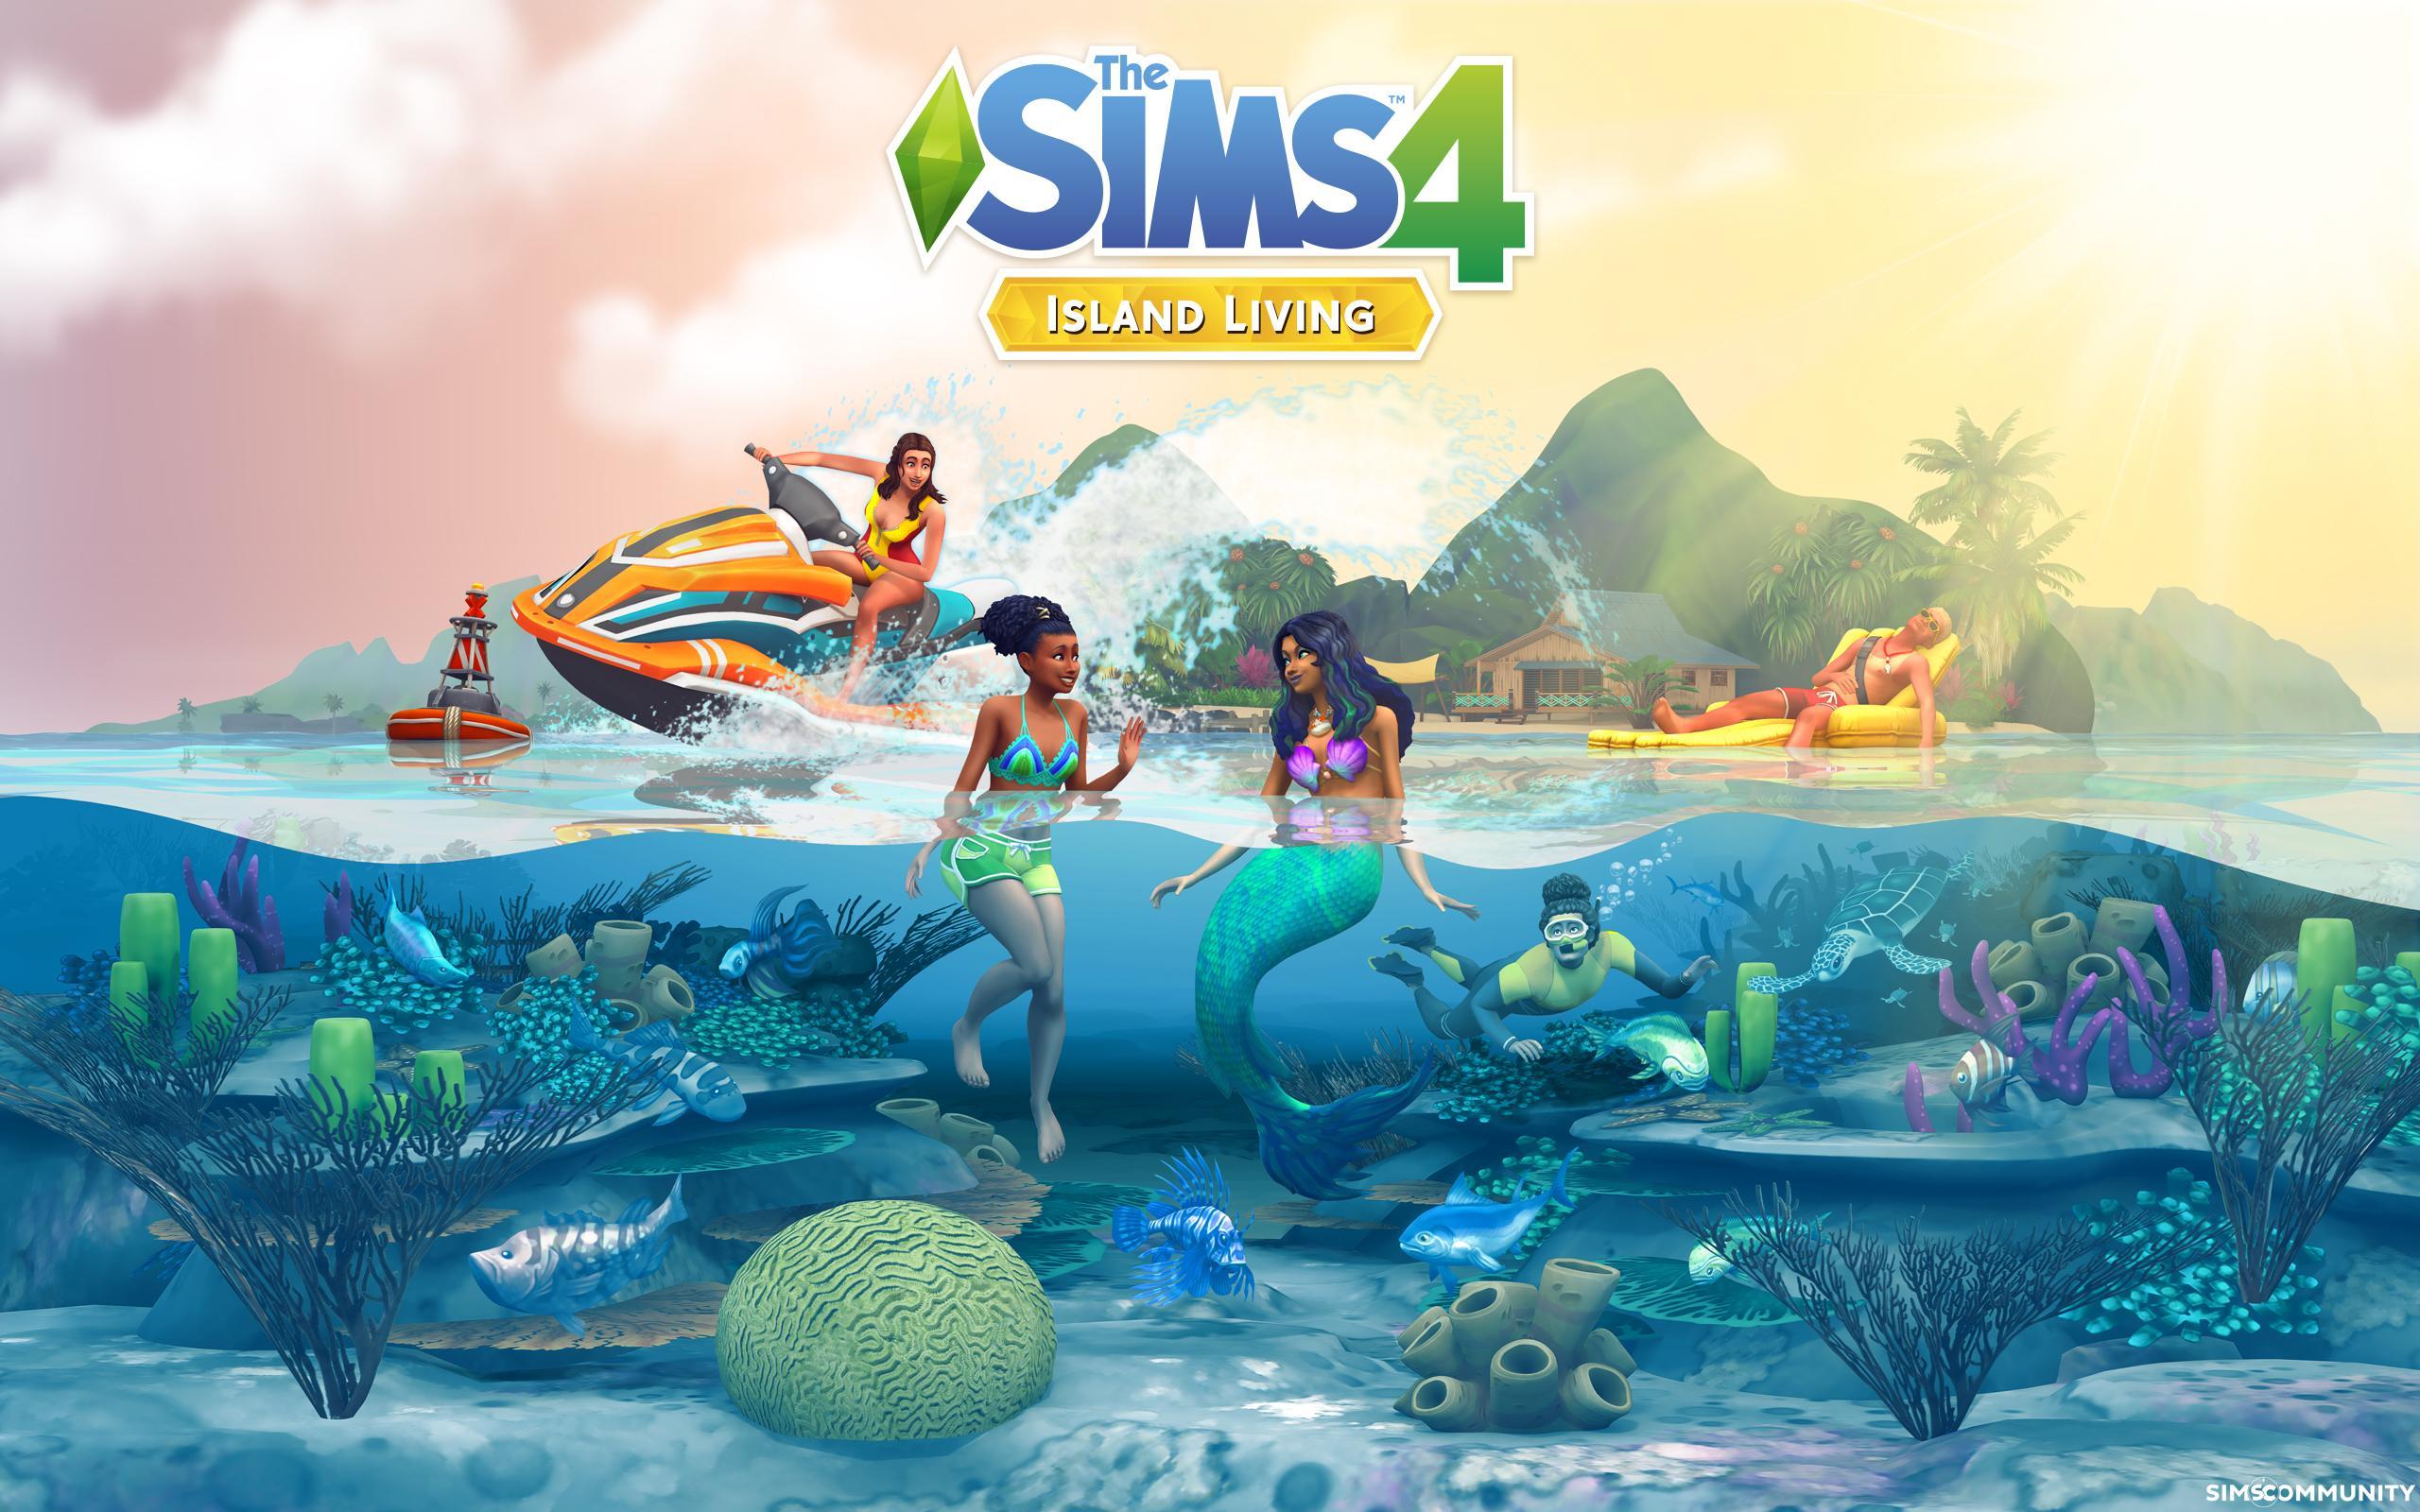 The Sims 4 Island Living: Desktop and Smartphone Wallpaper